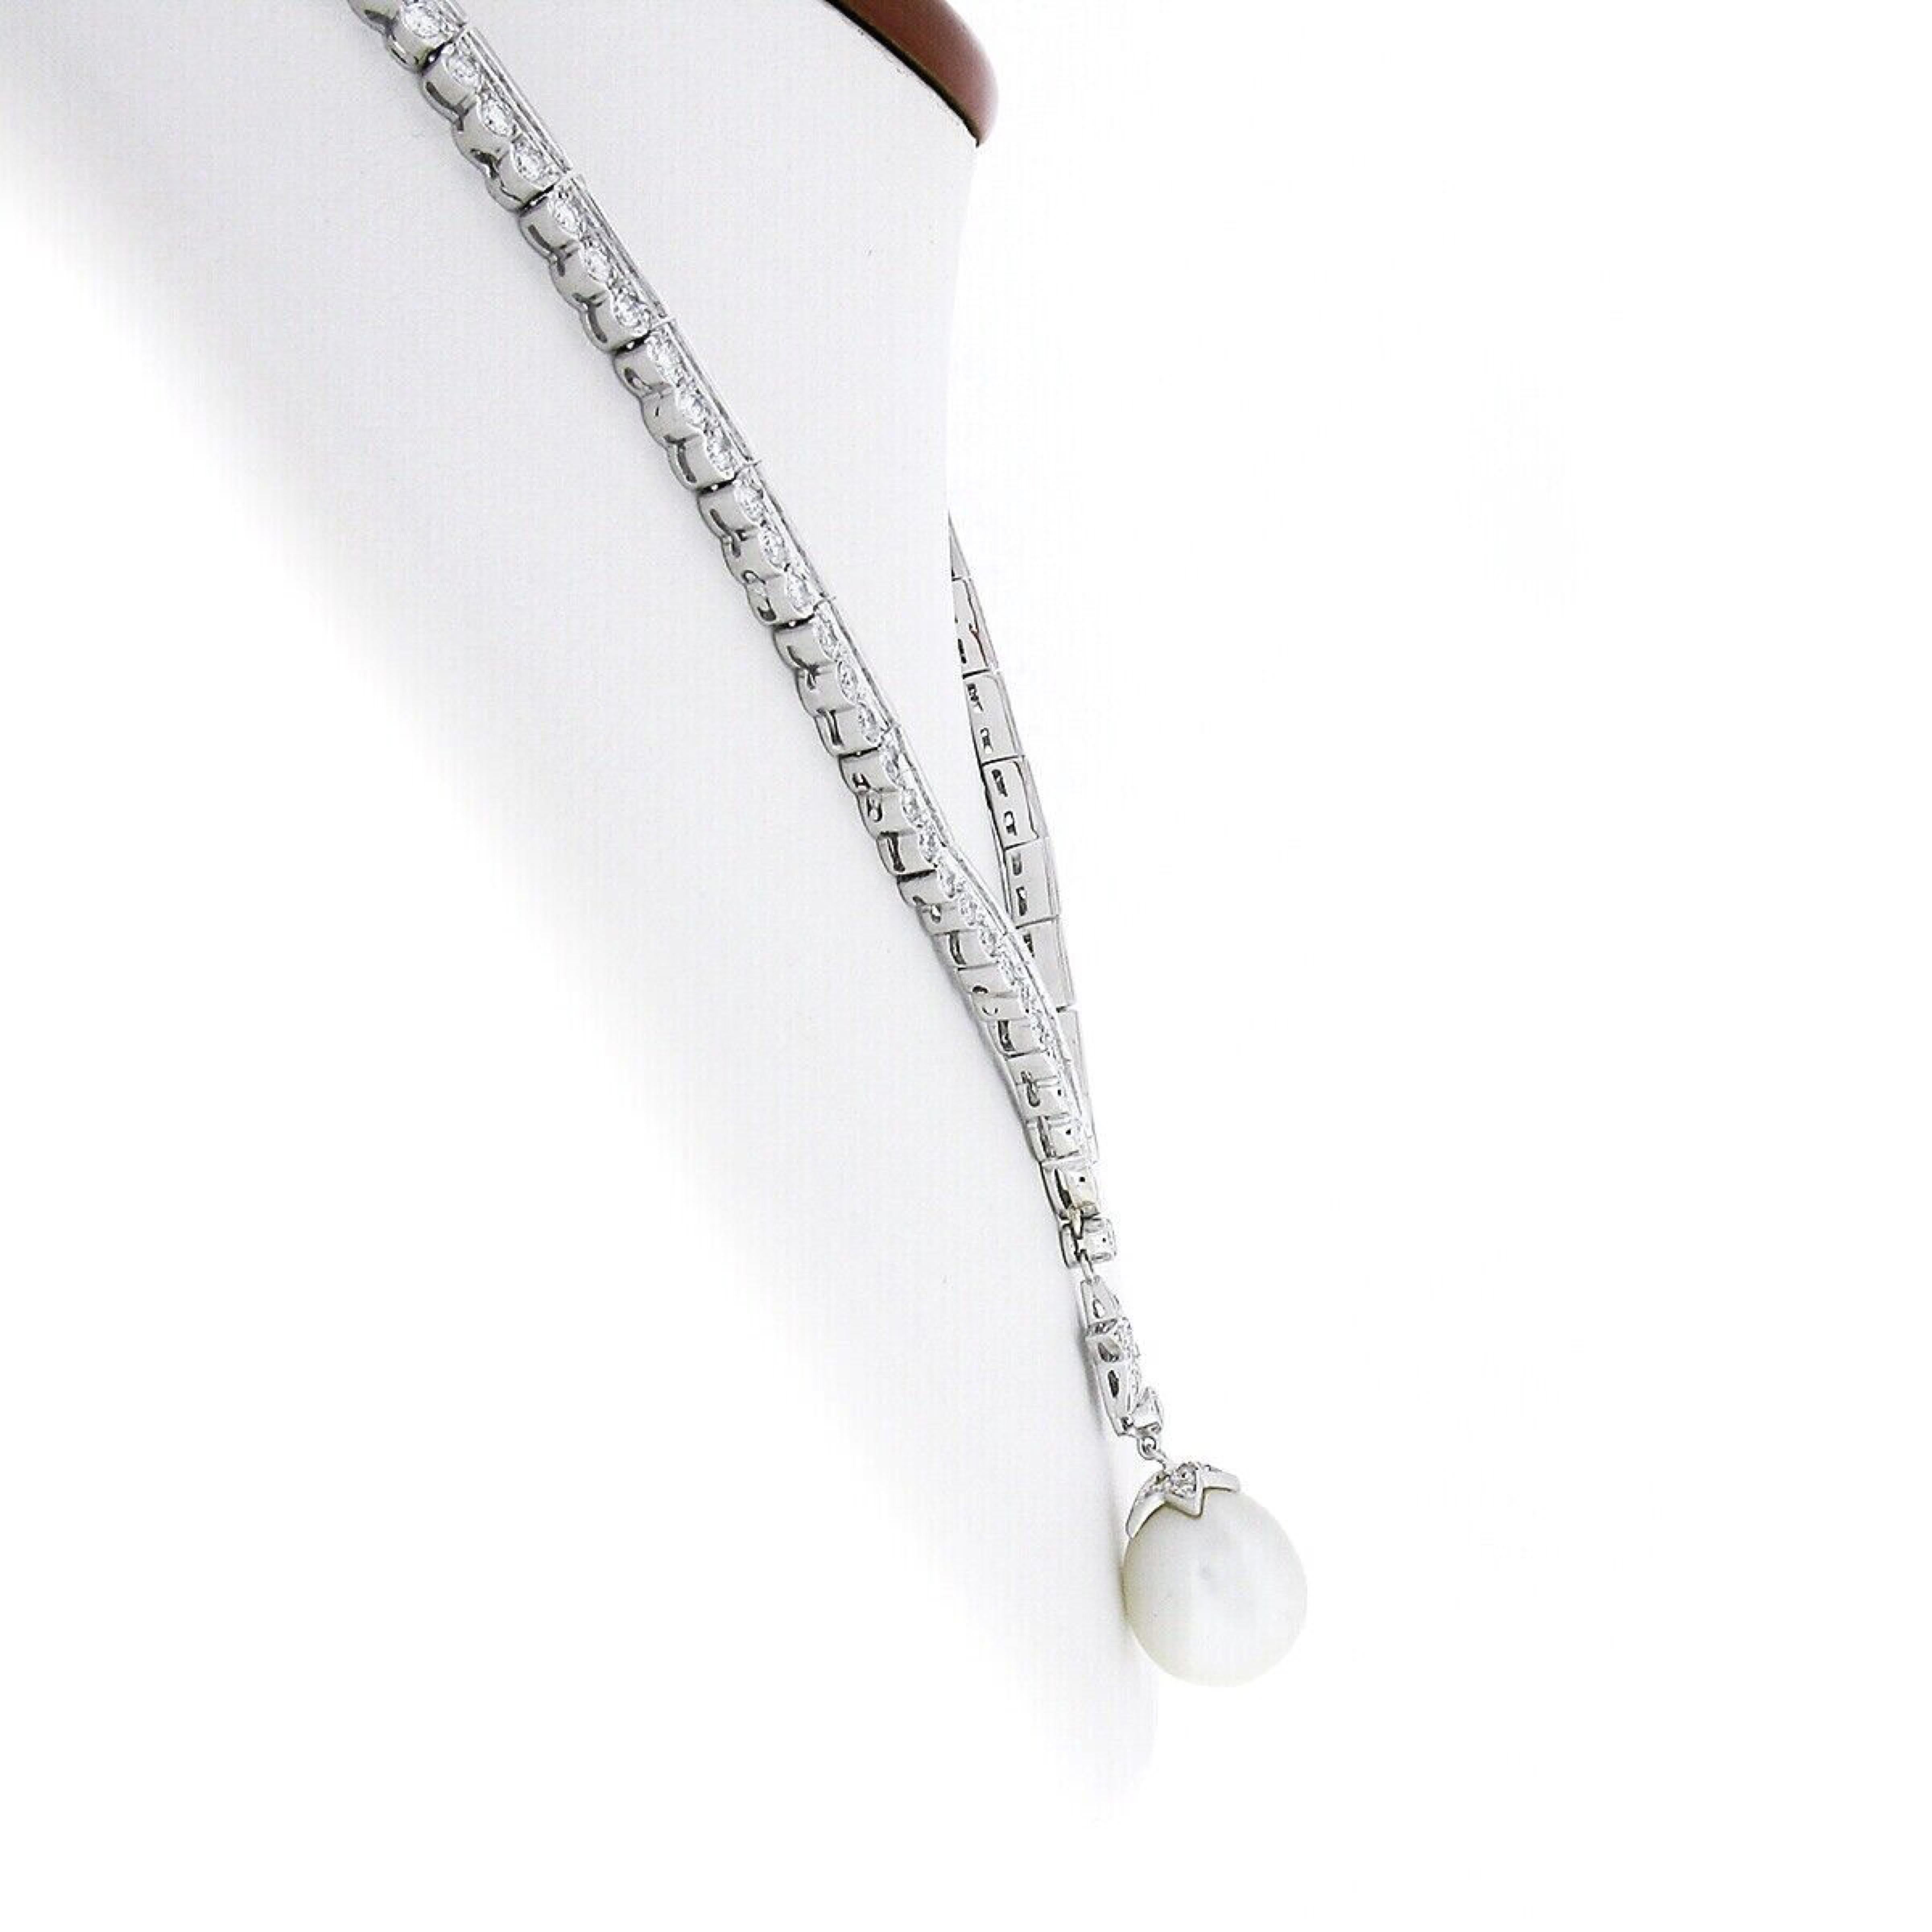 This magnificent and fancy chevron necklace is crafted from solid 18k white gold. It is constructed from very well made scalloped edge links throughout and features a gorgeous diamond covered star link and large cultured pearl pendant that gently